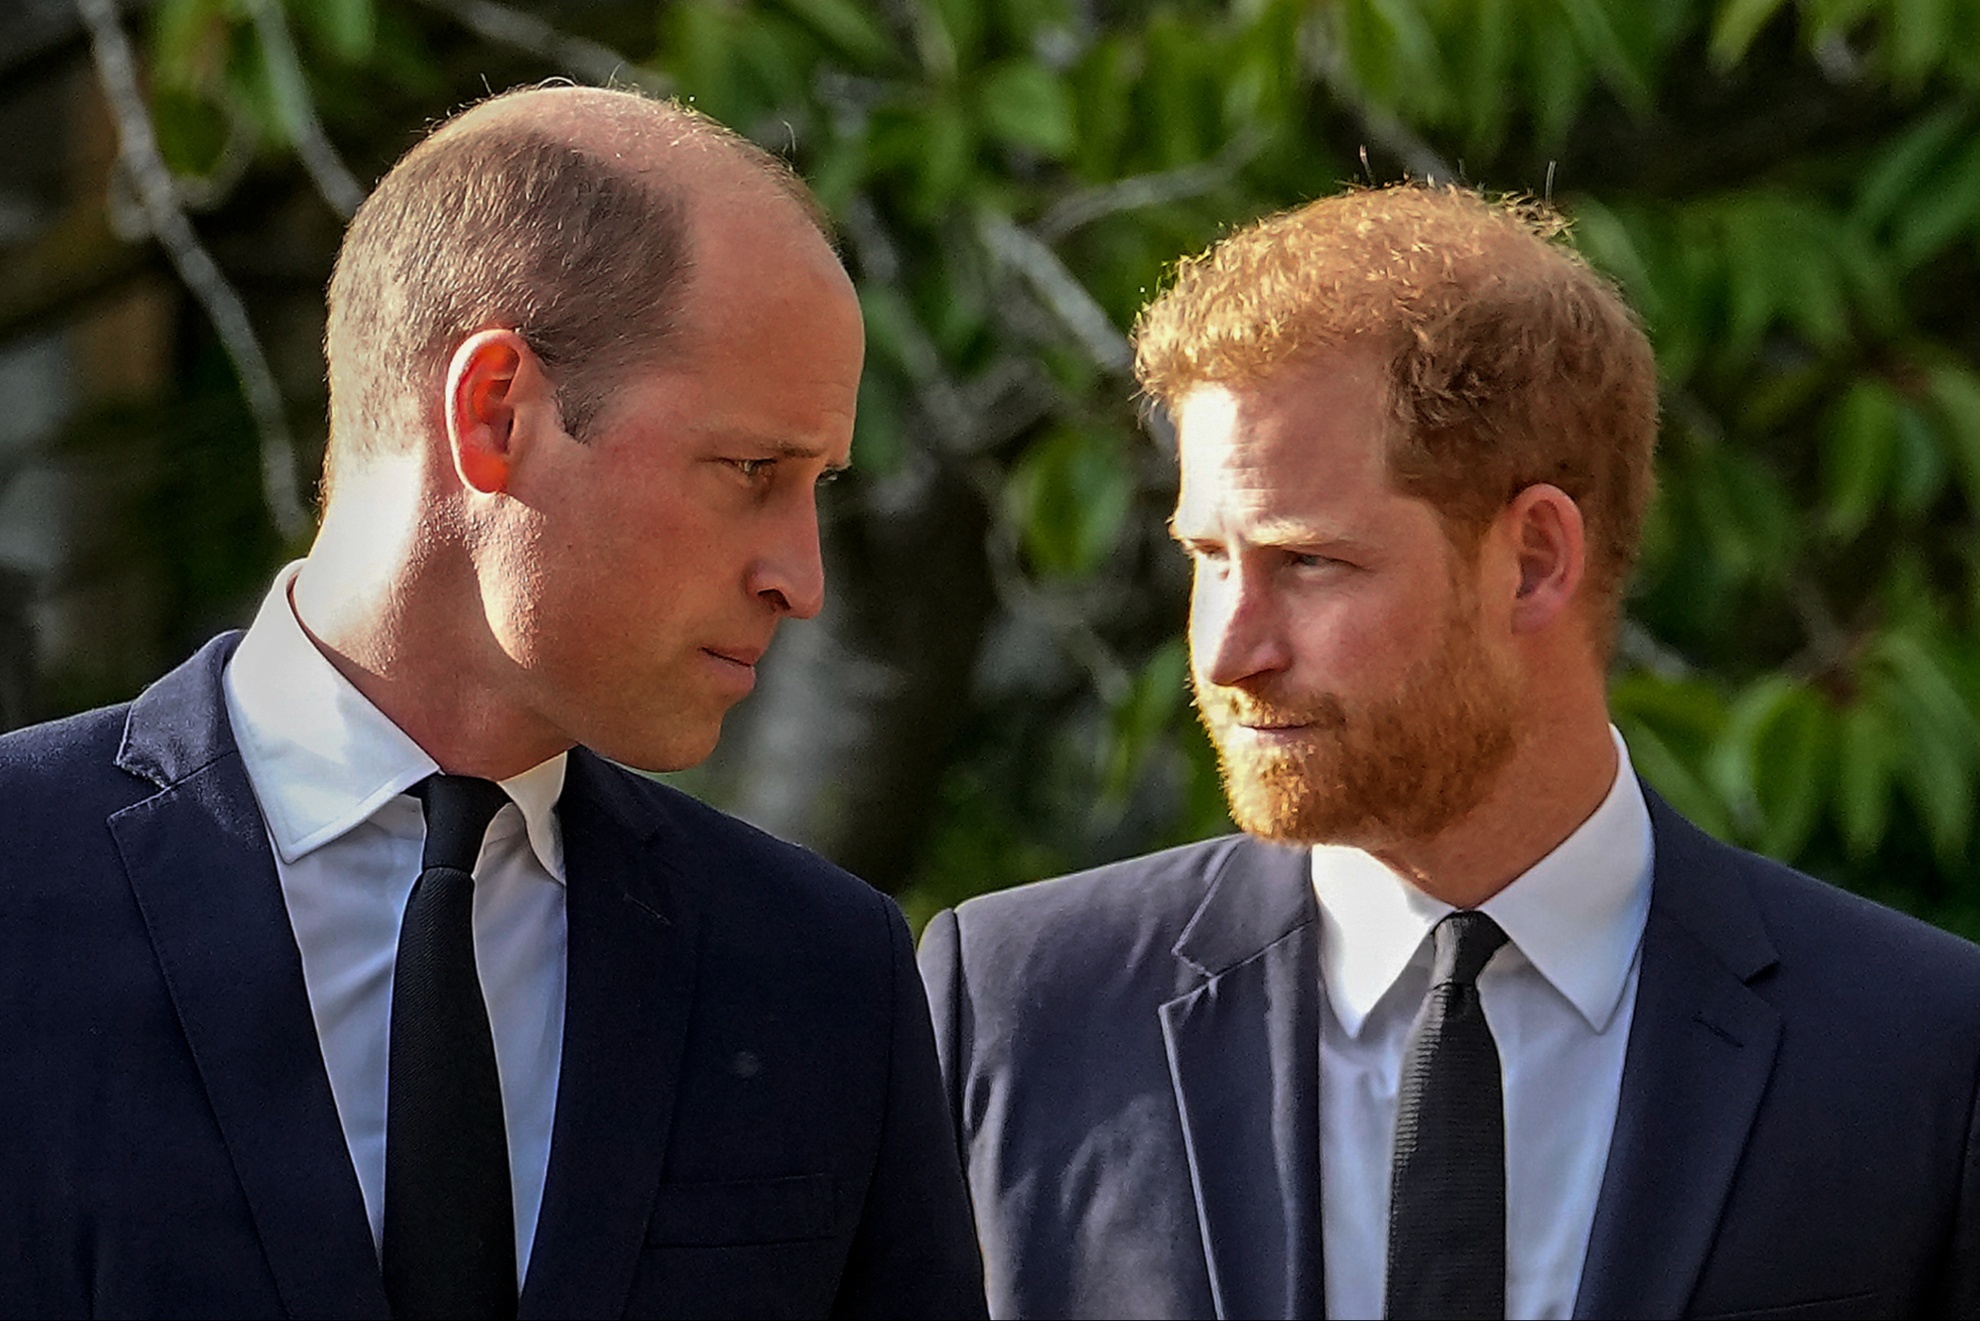 King Charles sons, Prince William and Prince Harry.